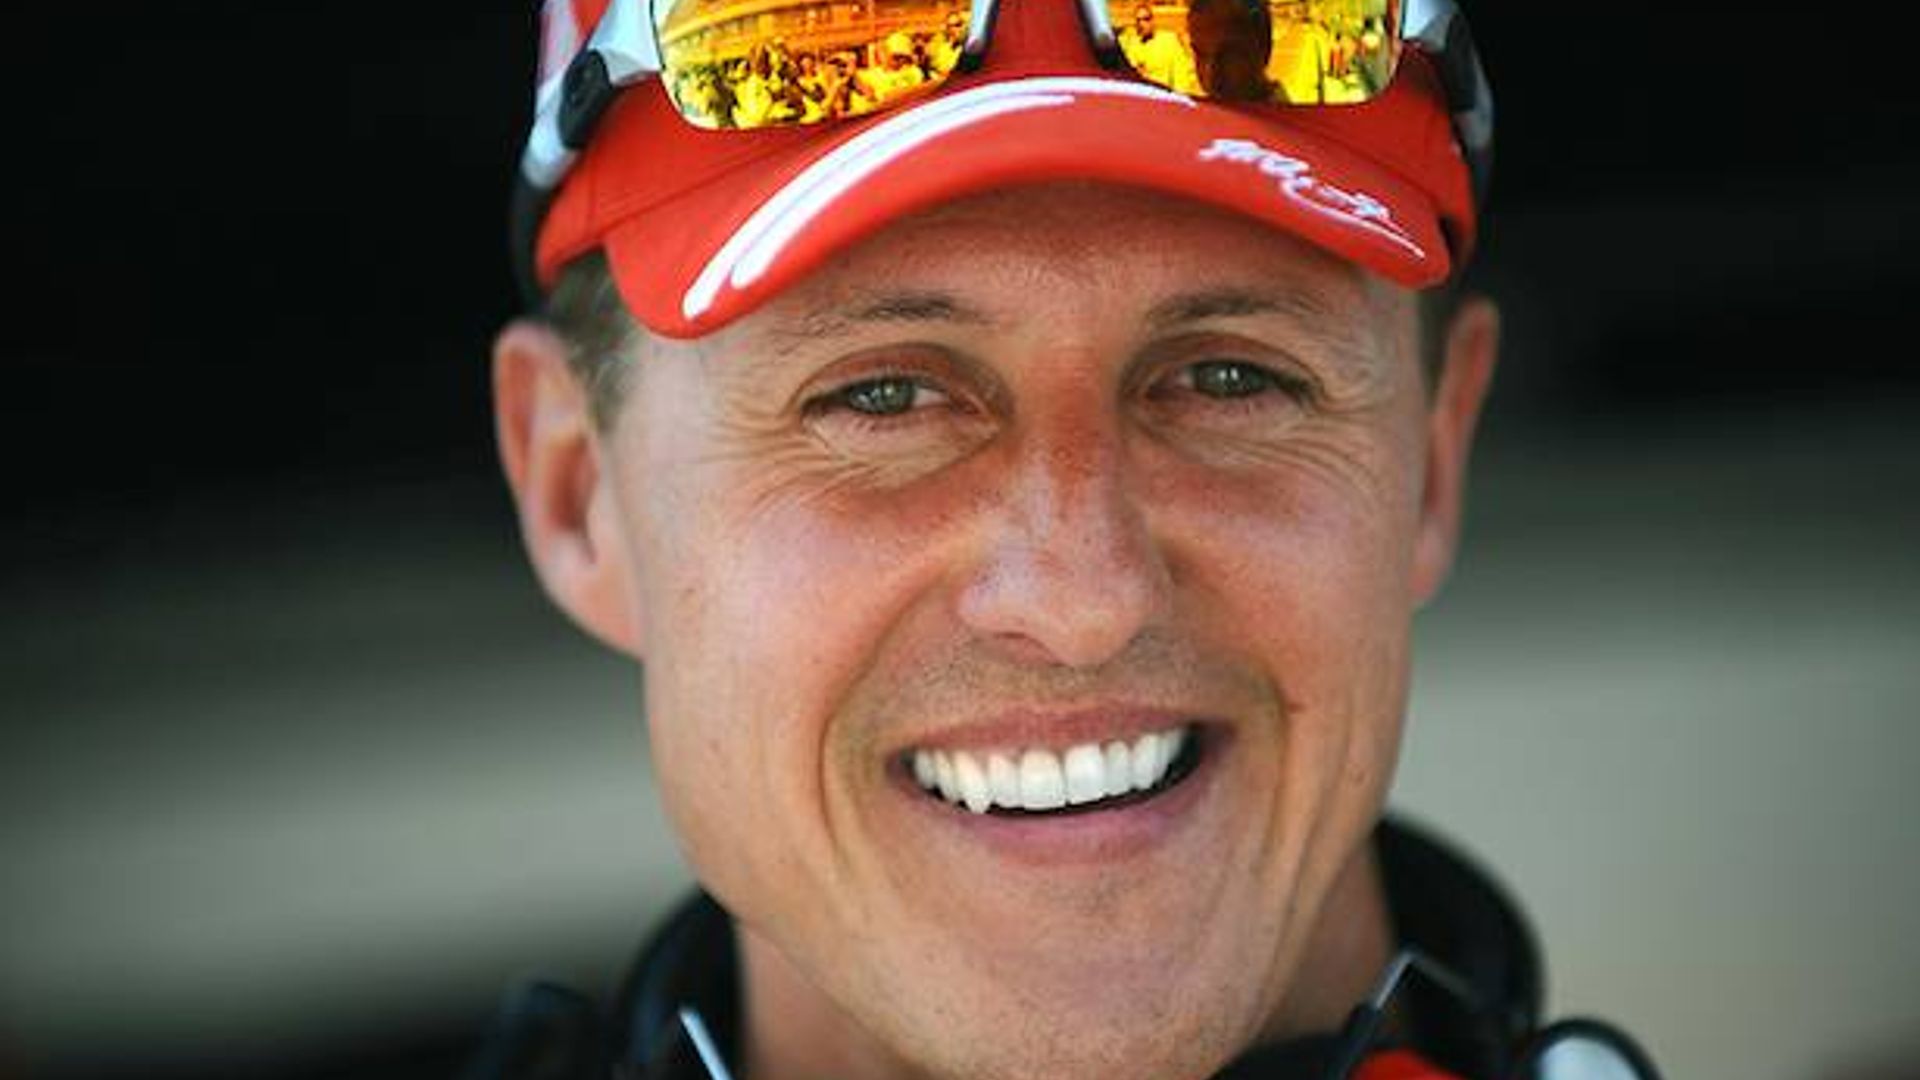 Fans reach out to support Michael Schumacher on his 50th birthday 